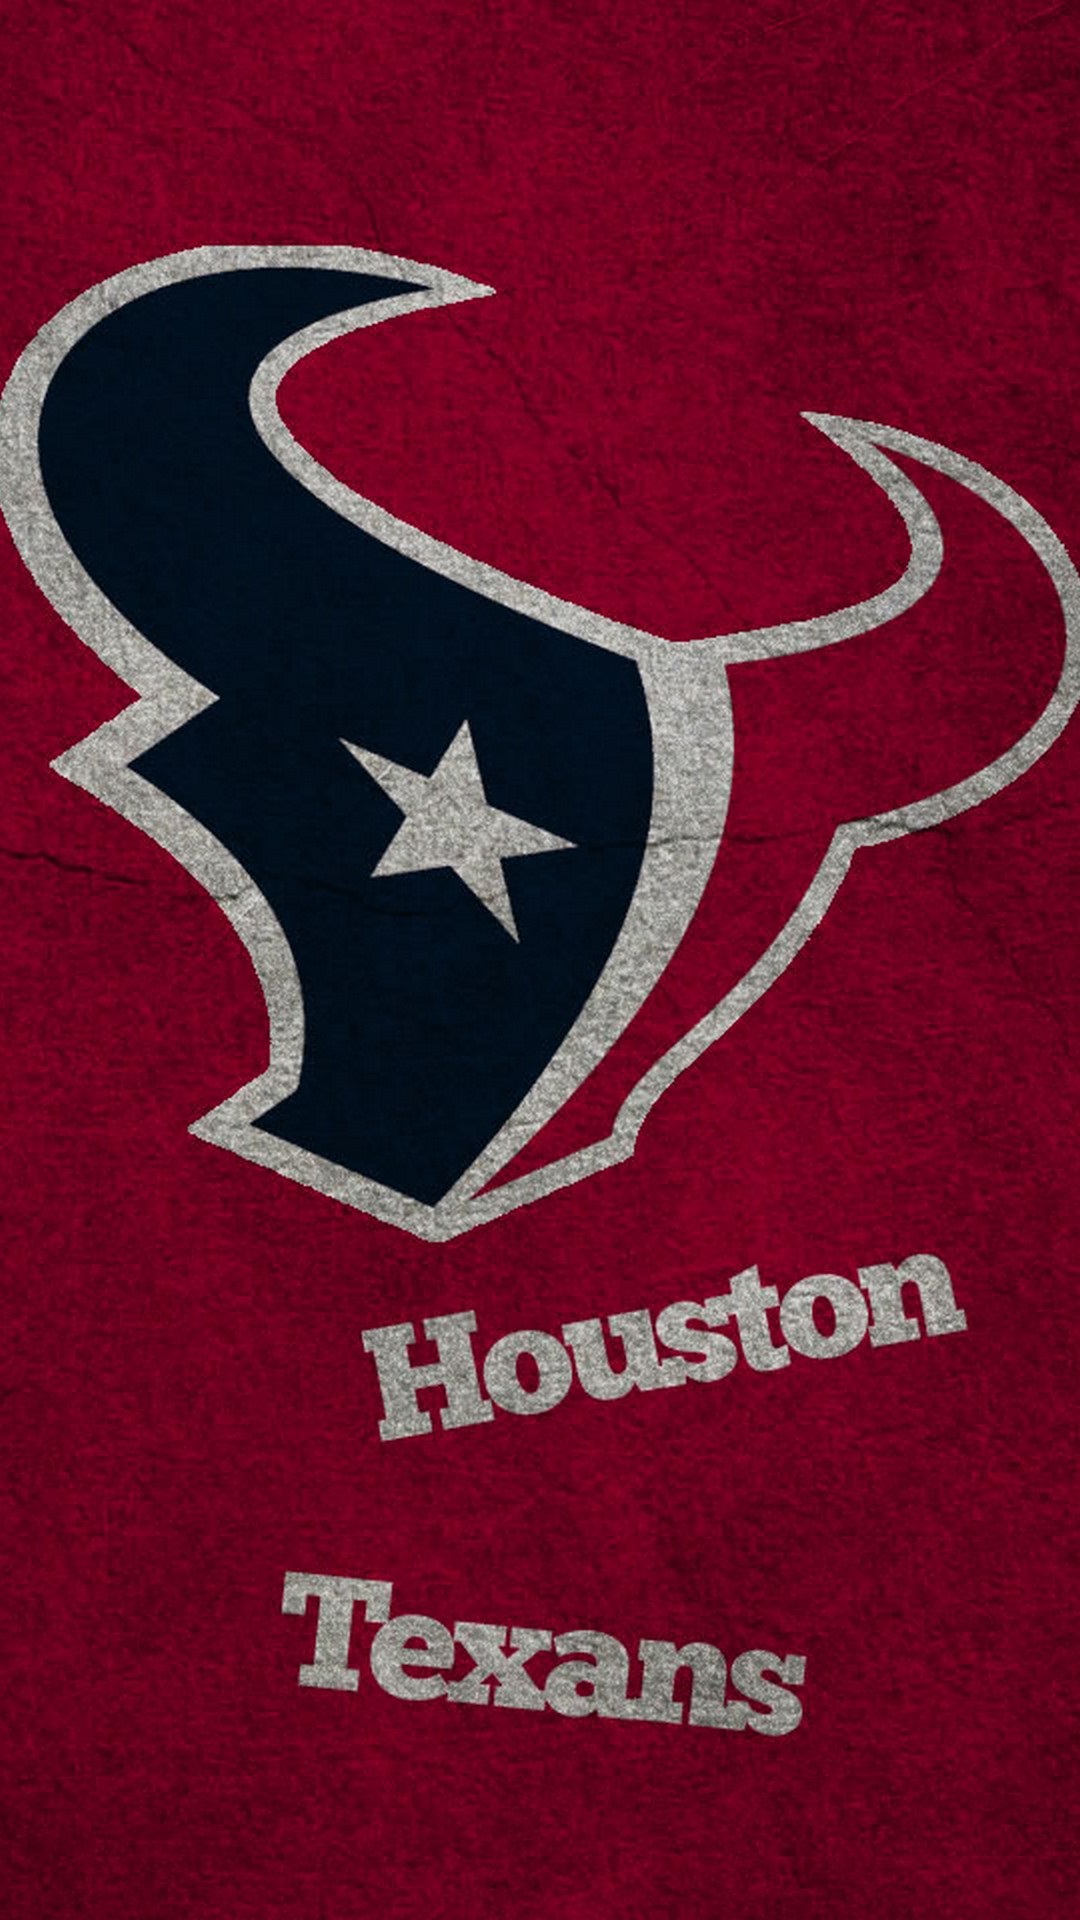 Houston Texans iPhone Backgrounds with high-resolution 1080x1920 pixel. Download and set as wallpaper for Apple iPhone X, XS Max, XR, 8, 7, 6, SE, iPad, Android